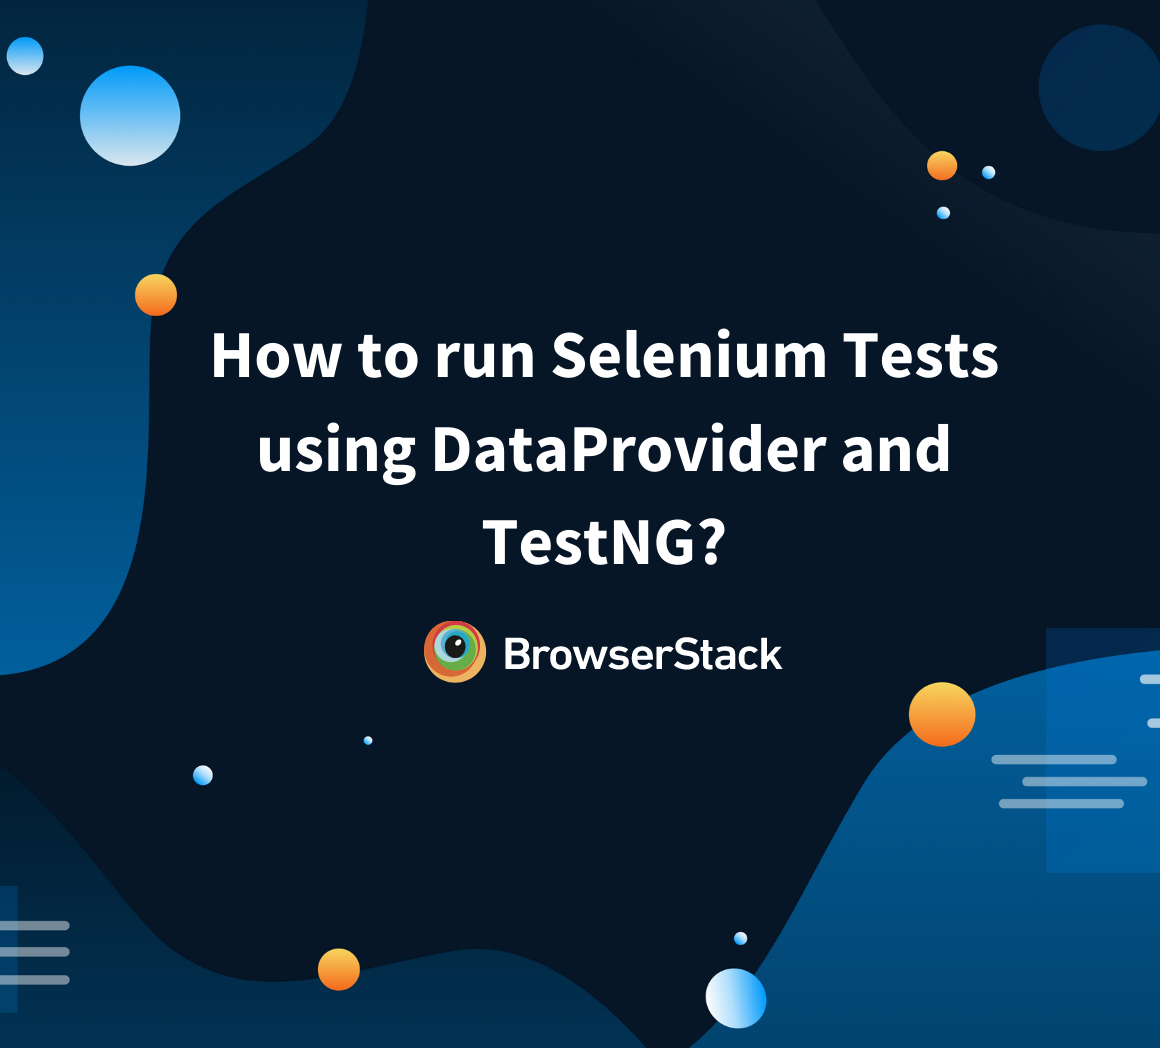 Selenium Tests using Dataprovider and TestNG?